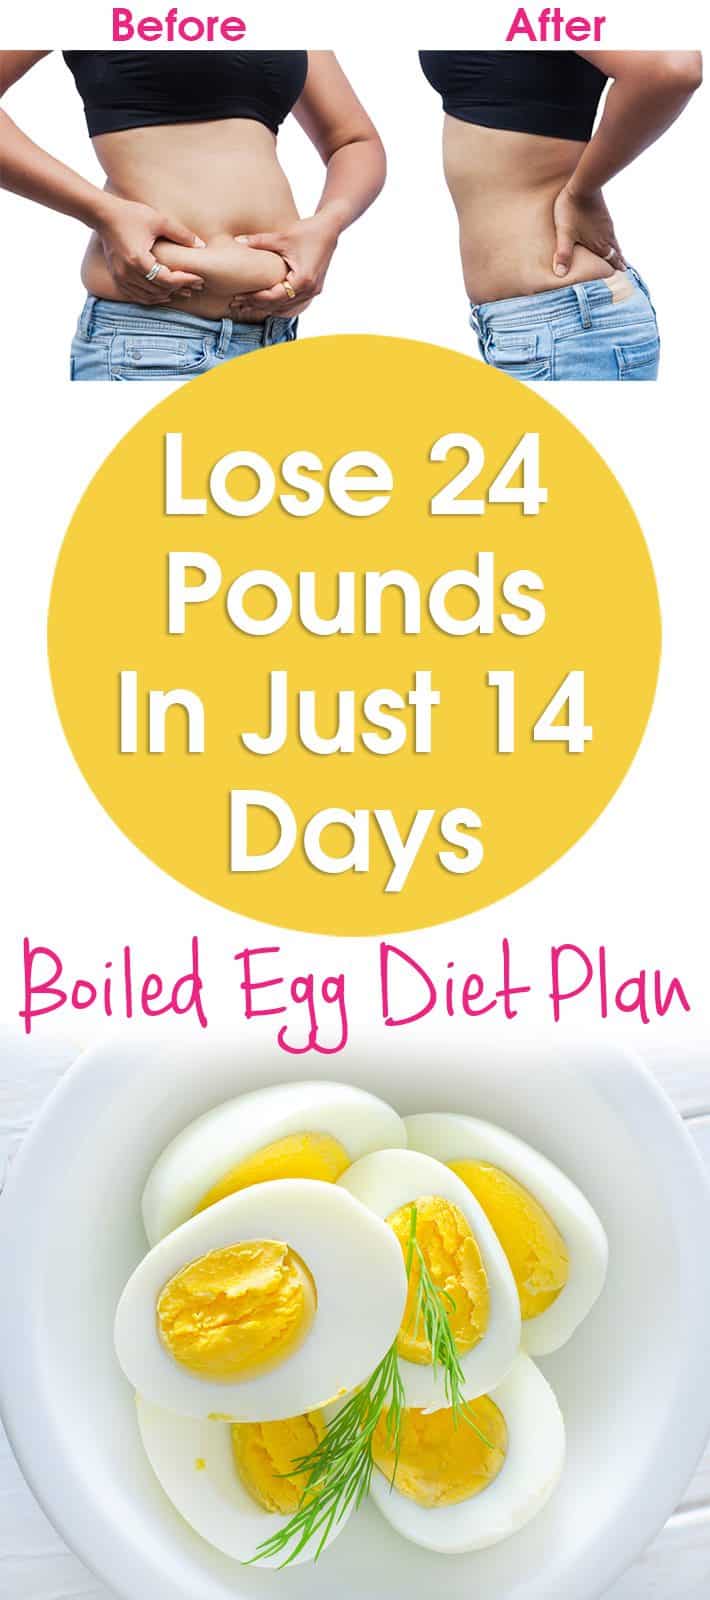 lose-24-pounds-in-just-14-days-boiled-egg-diet-2-weeks-plan